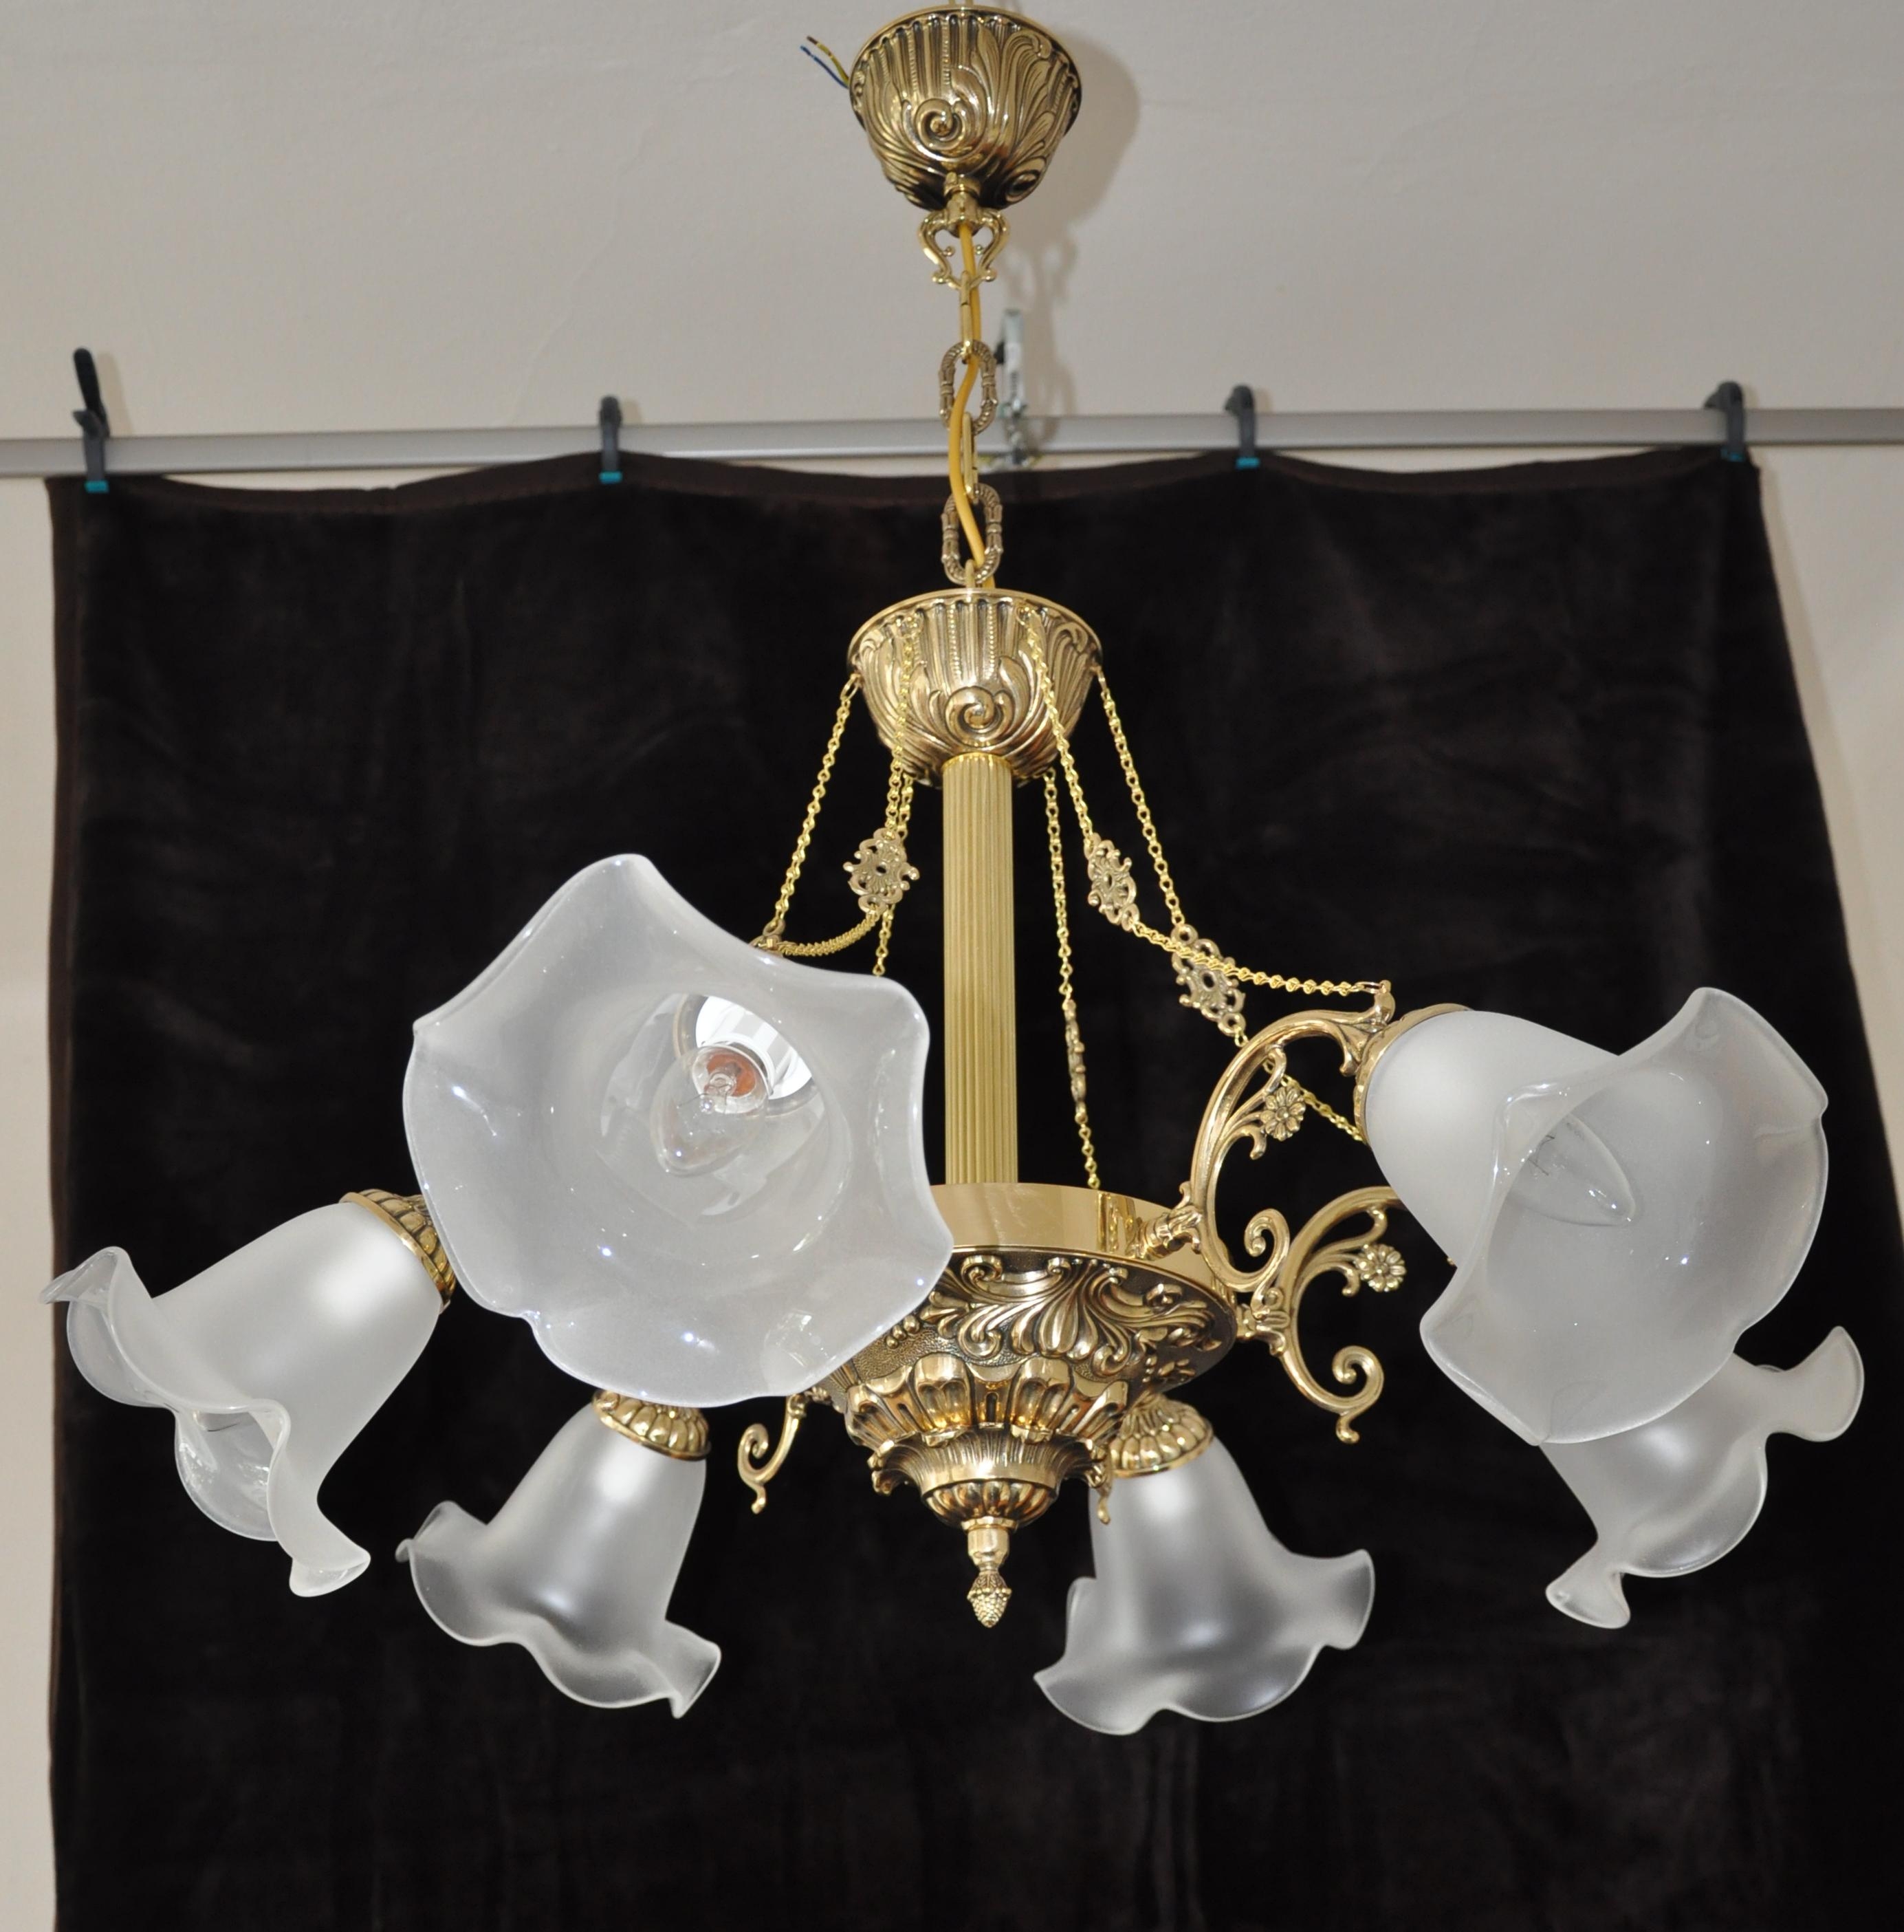 5-arm cast brass chandelier with cut crystal drops